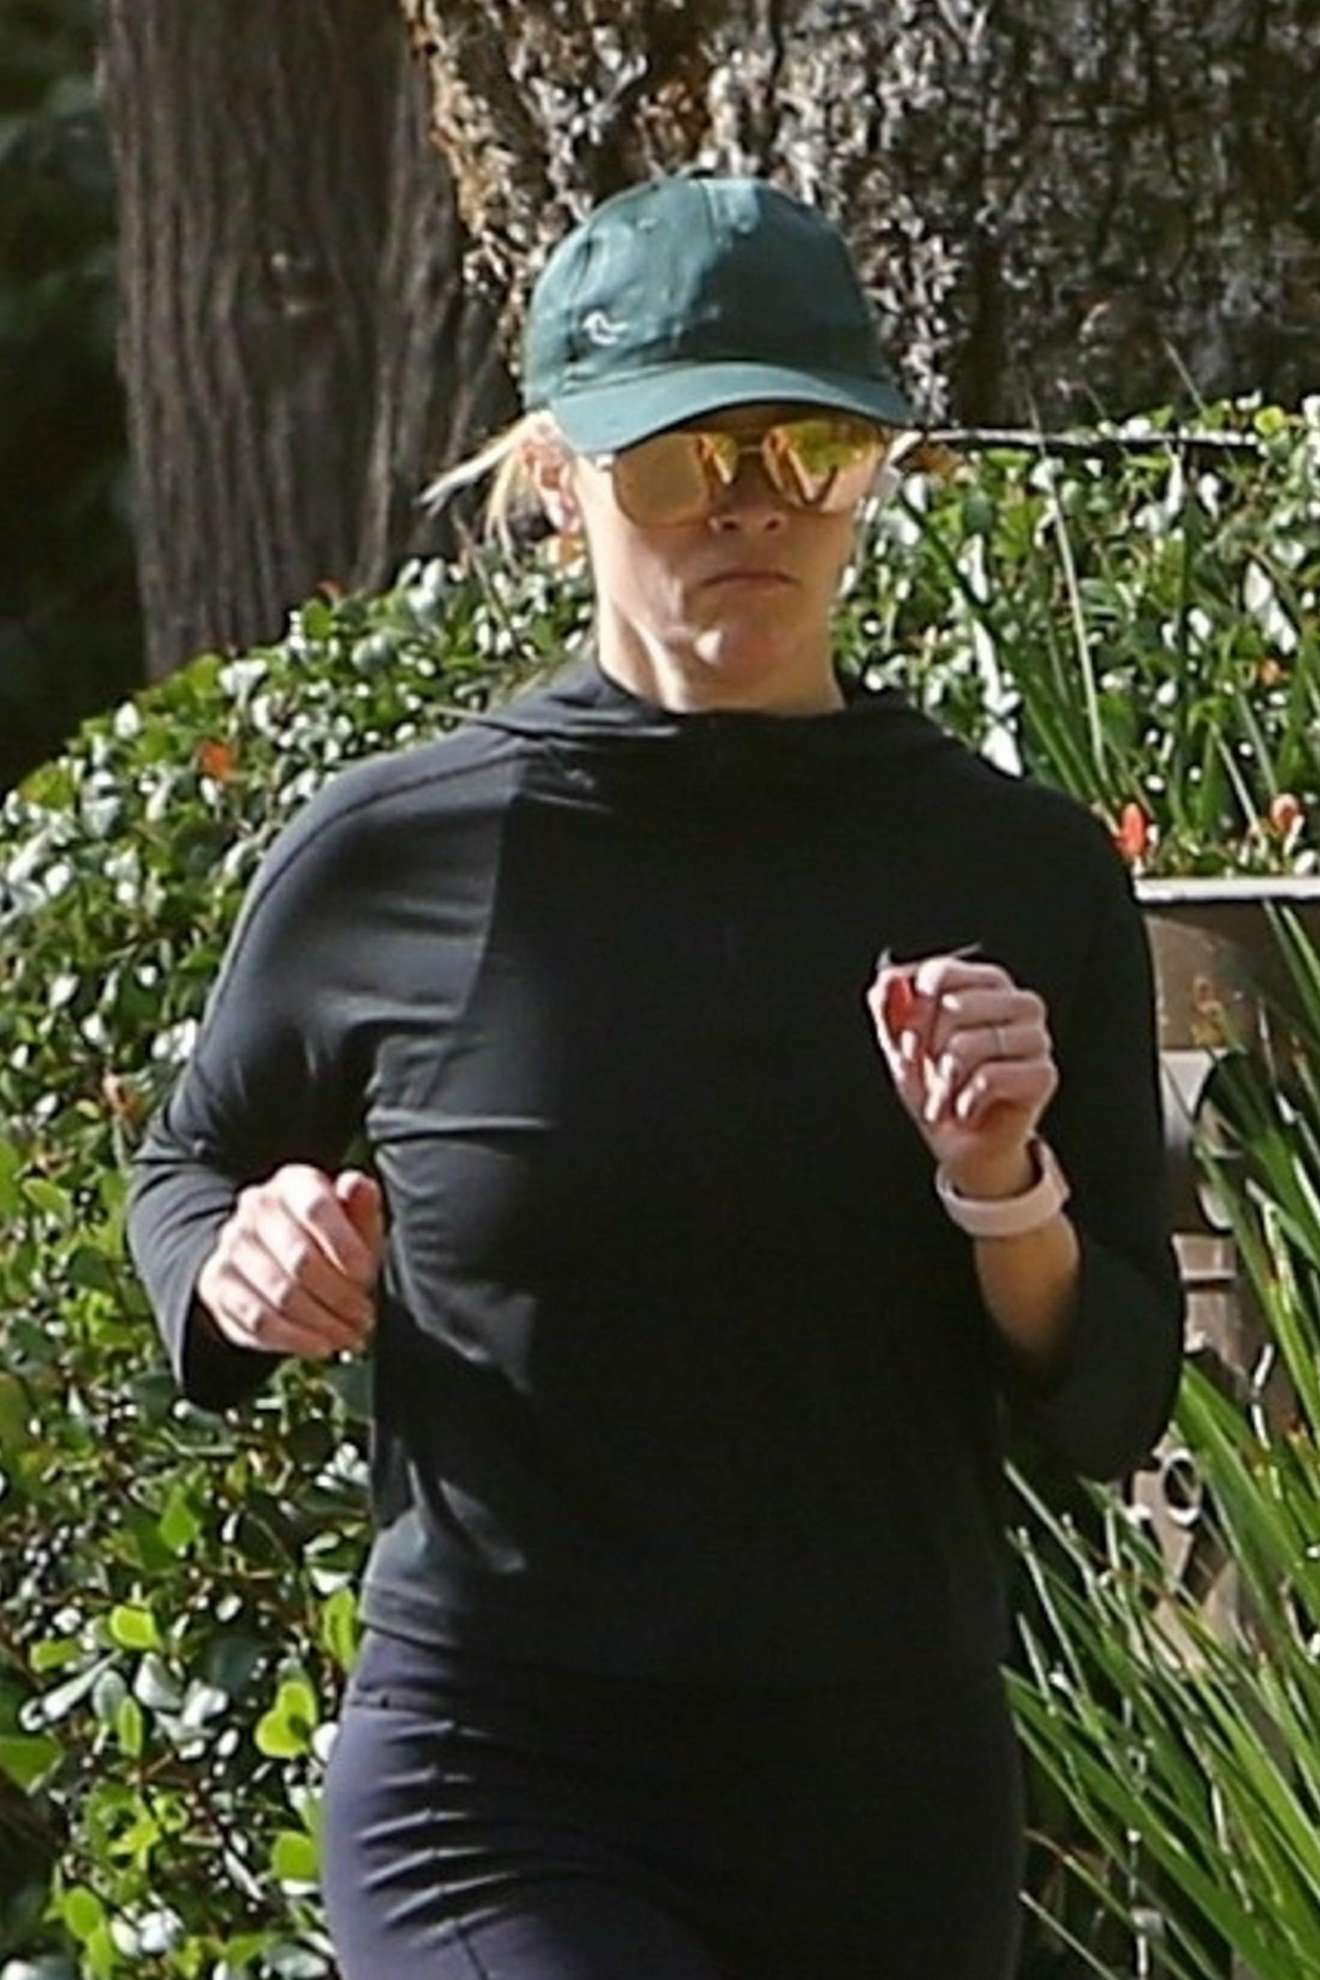 Reese Witherspoon â€“ Jog candids in Santa Monica